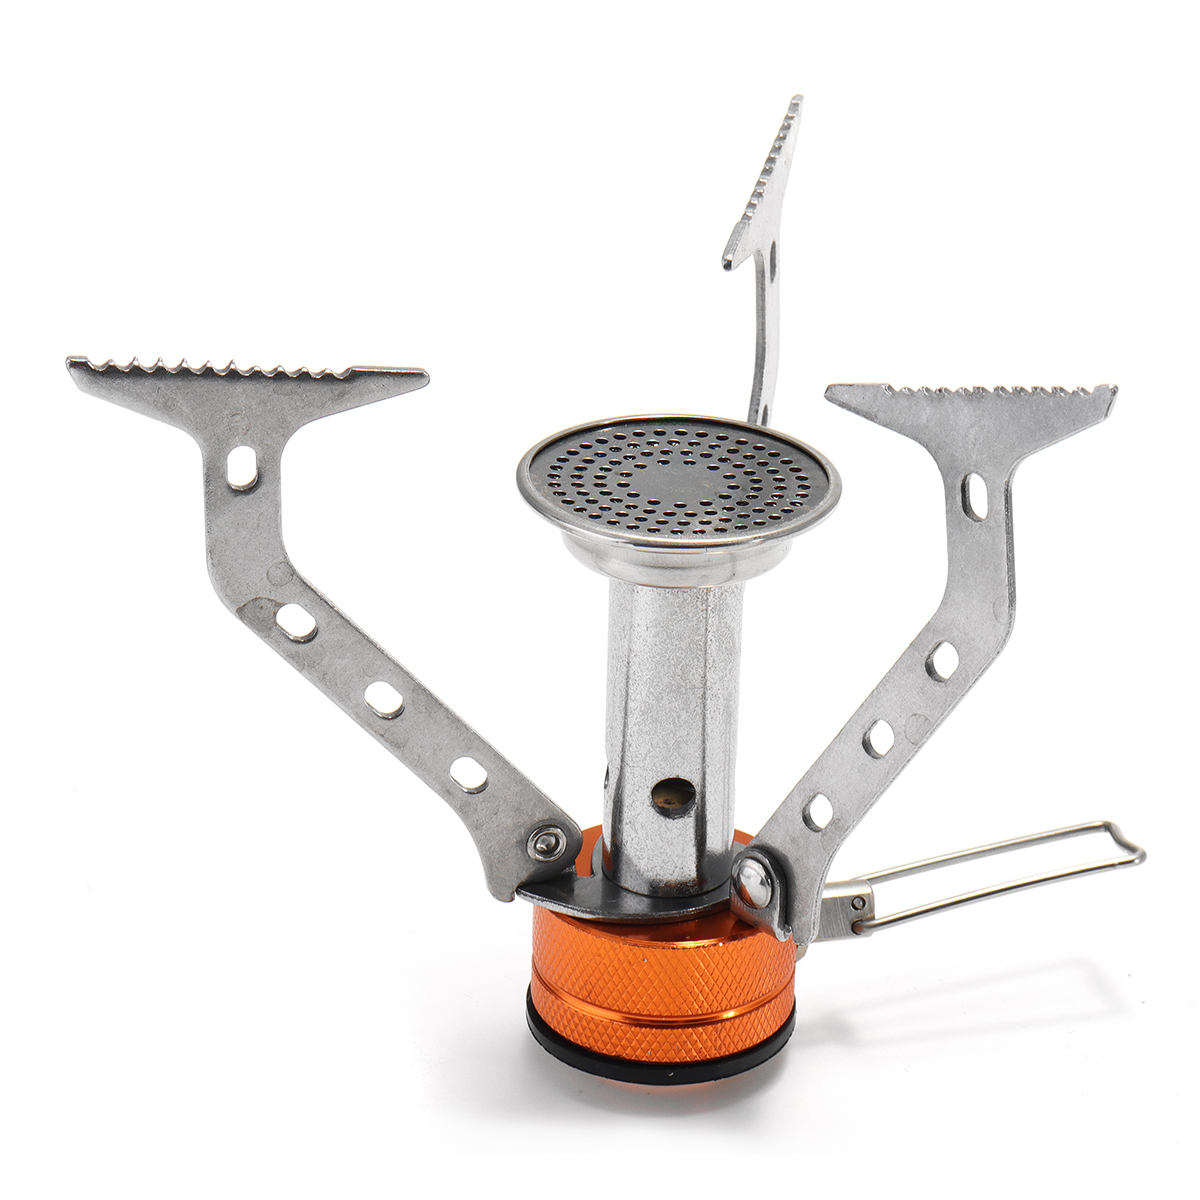 

AOTU 3000W Outdoor Portable Mini Camping Cooking Stove Picnic Gas Burner Furnace Oven